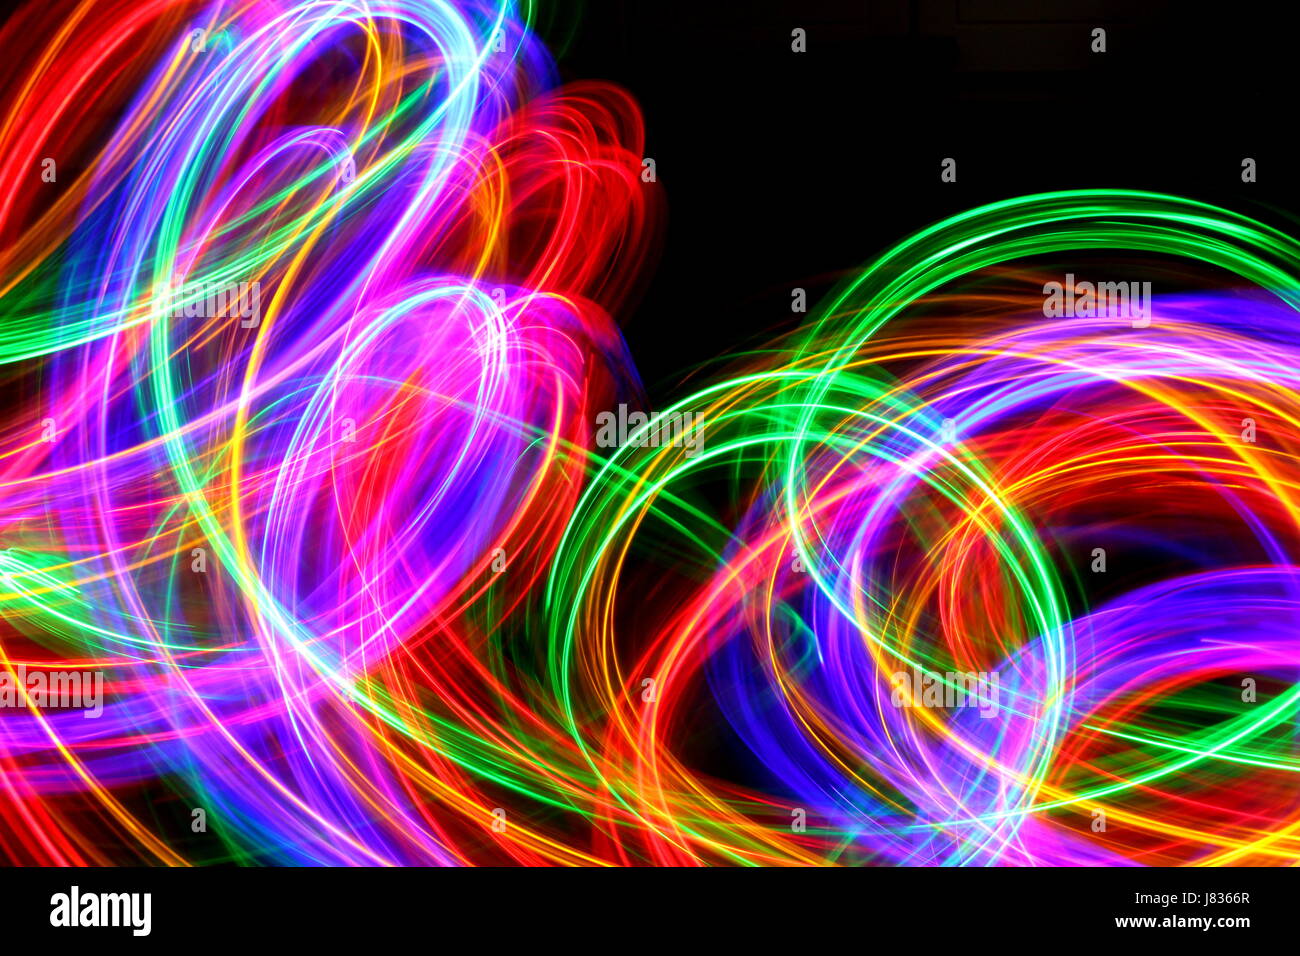 Multi Coloured Light Painting Photography, swirls and loops against a Stock Photo: 142670943 - Alamy